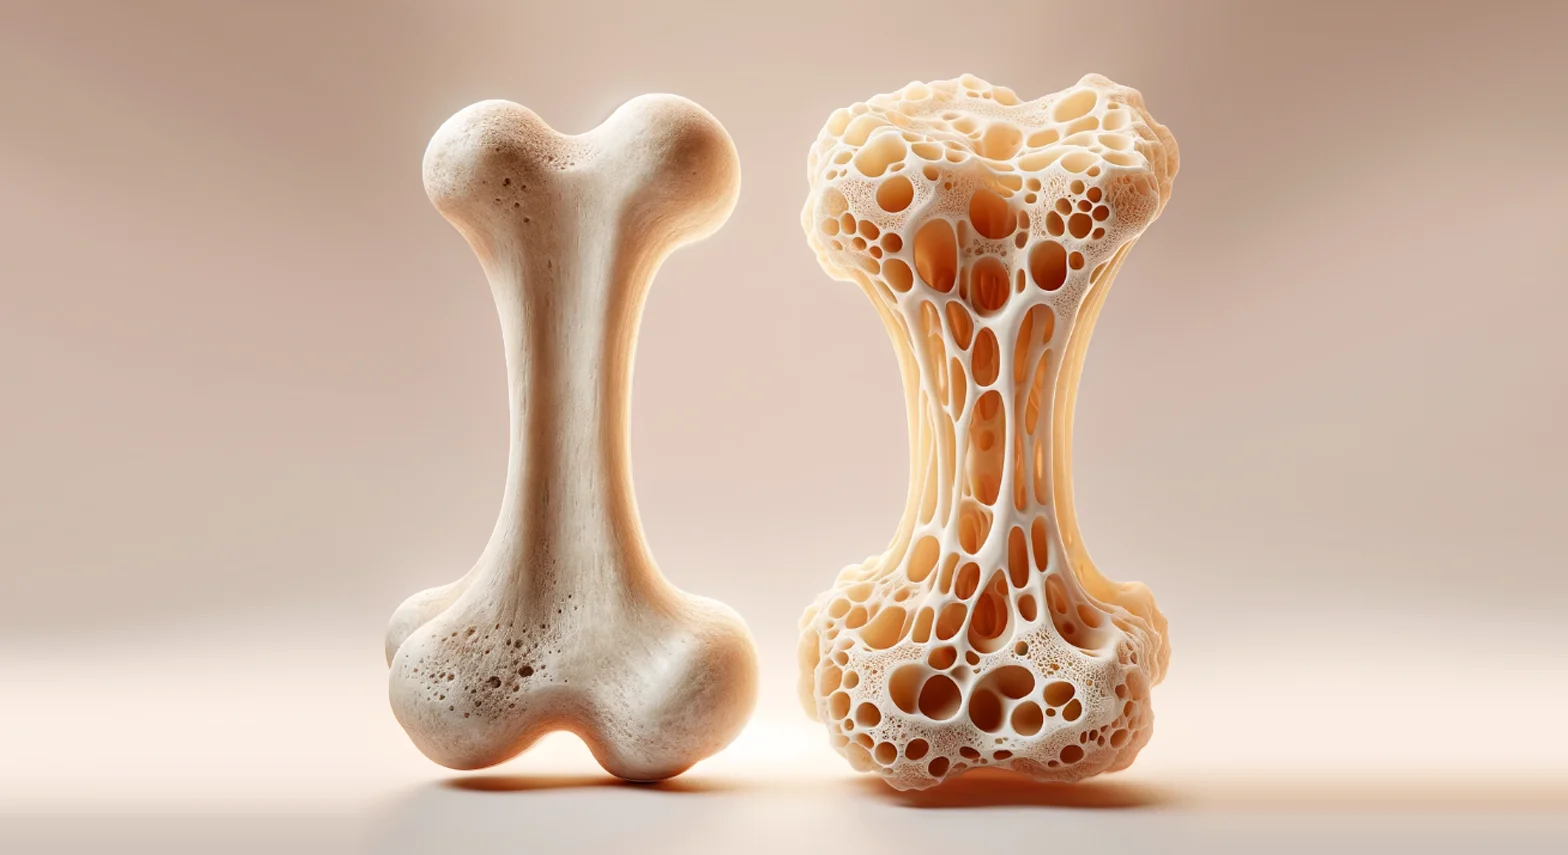 Two bones juxtaposed showing the effects of osteoporosis